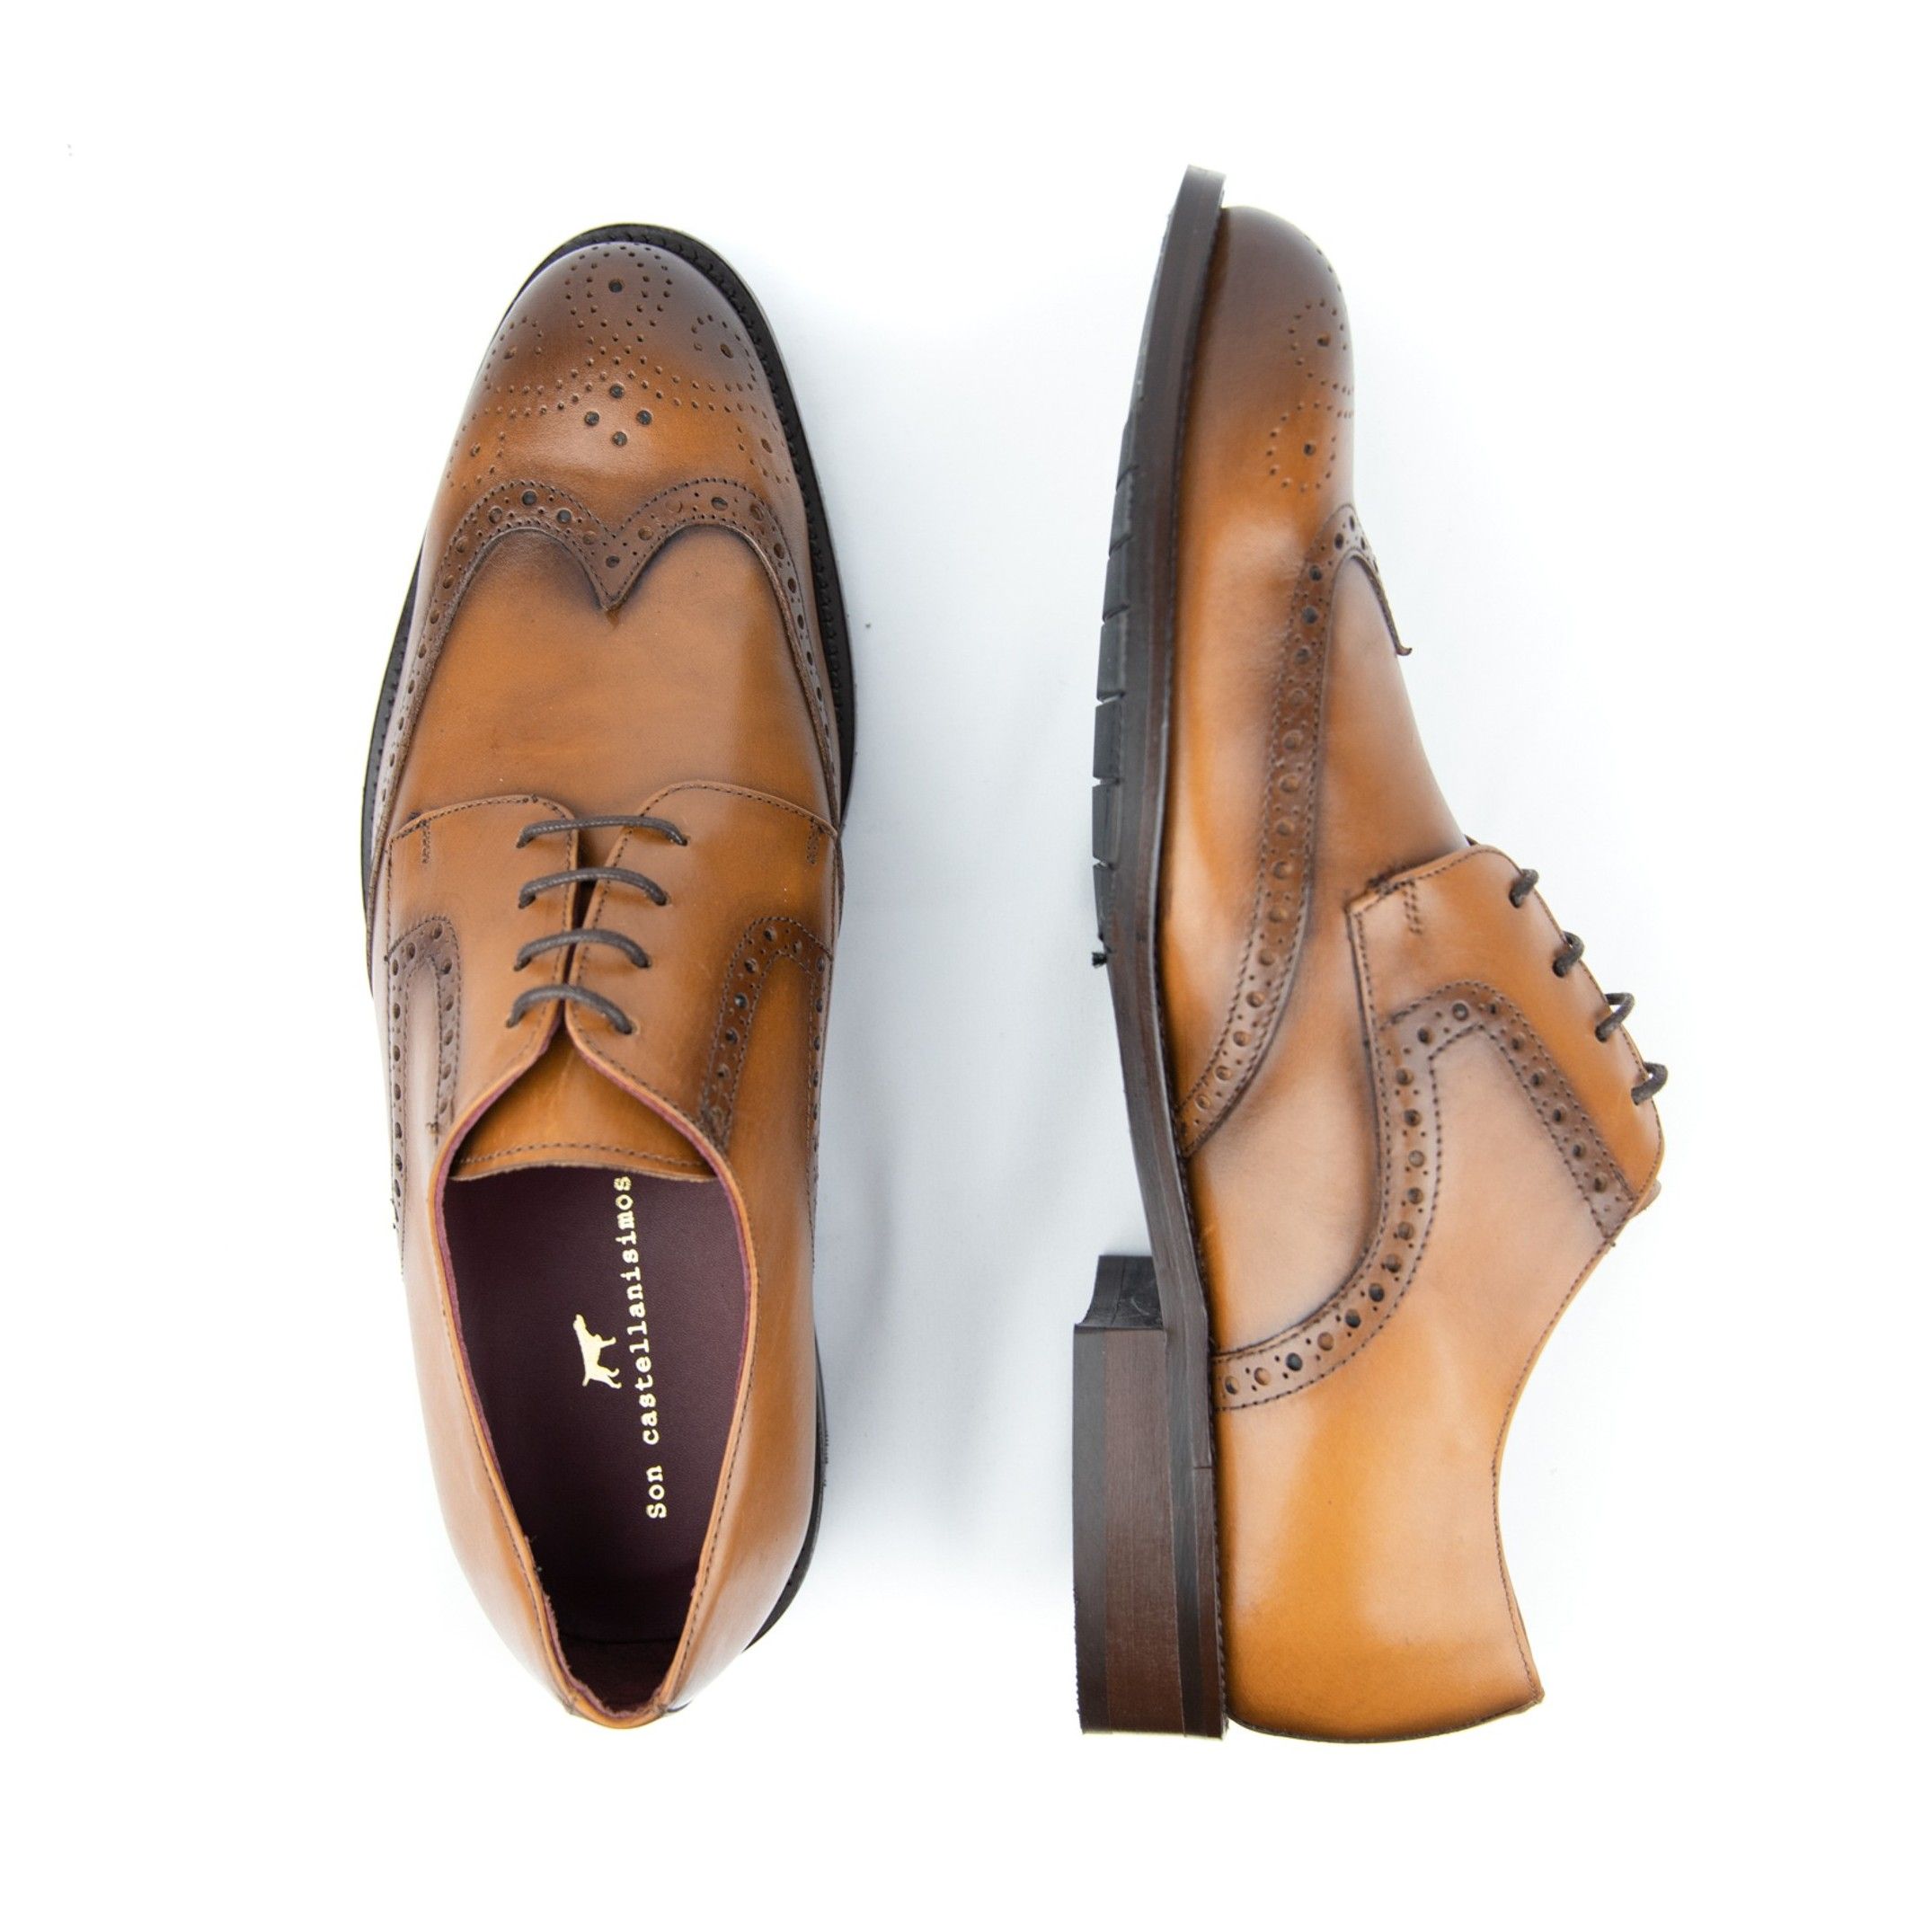 Nappa Leather Lace up shoes. Premium Collection of Son Castellanisimos. Outer material: Cowhide leather. Inner: Cowhide leather. Laces closure. Lining and insole: Cowhide leather. Leather sole. Height heel: 2'5 cm. Designed and manufacture in Spain.